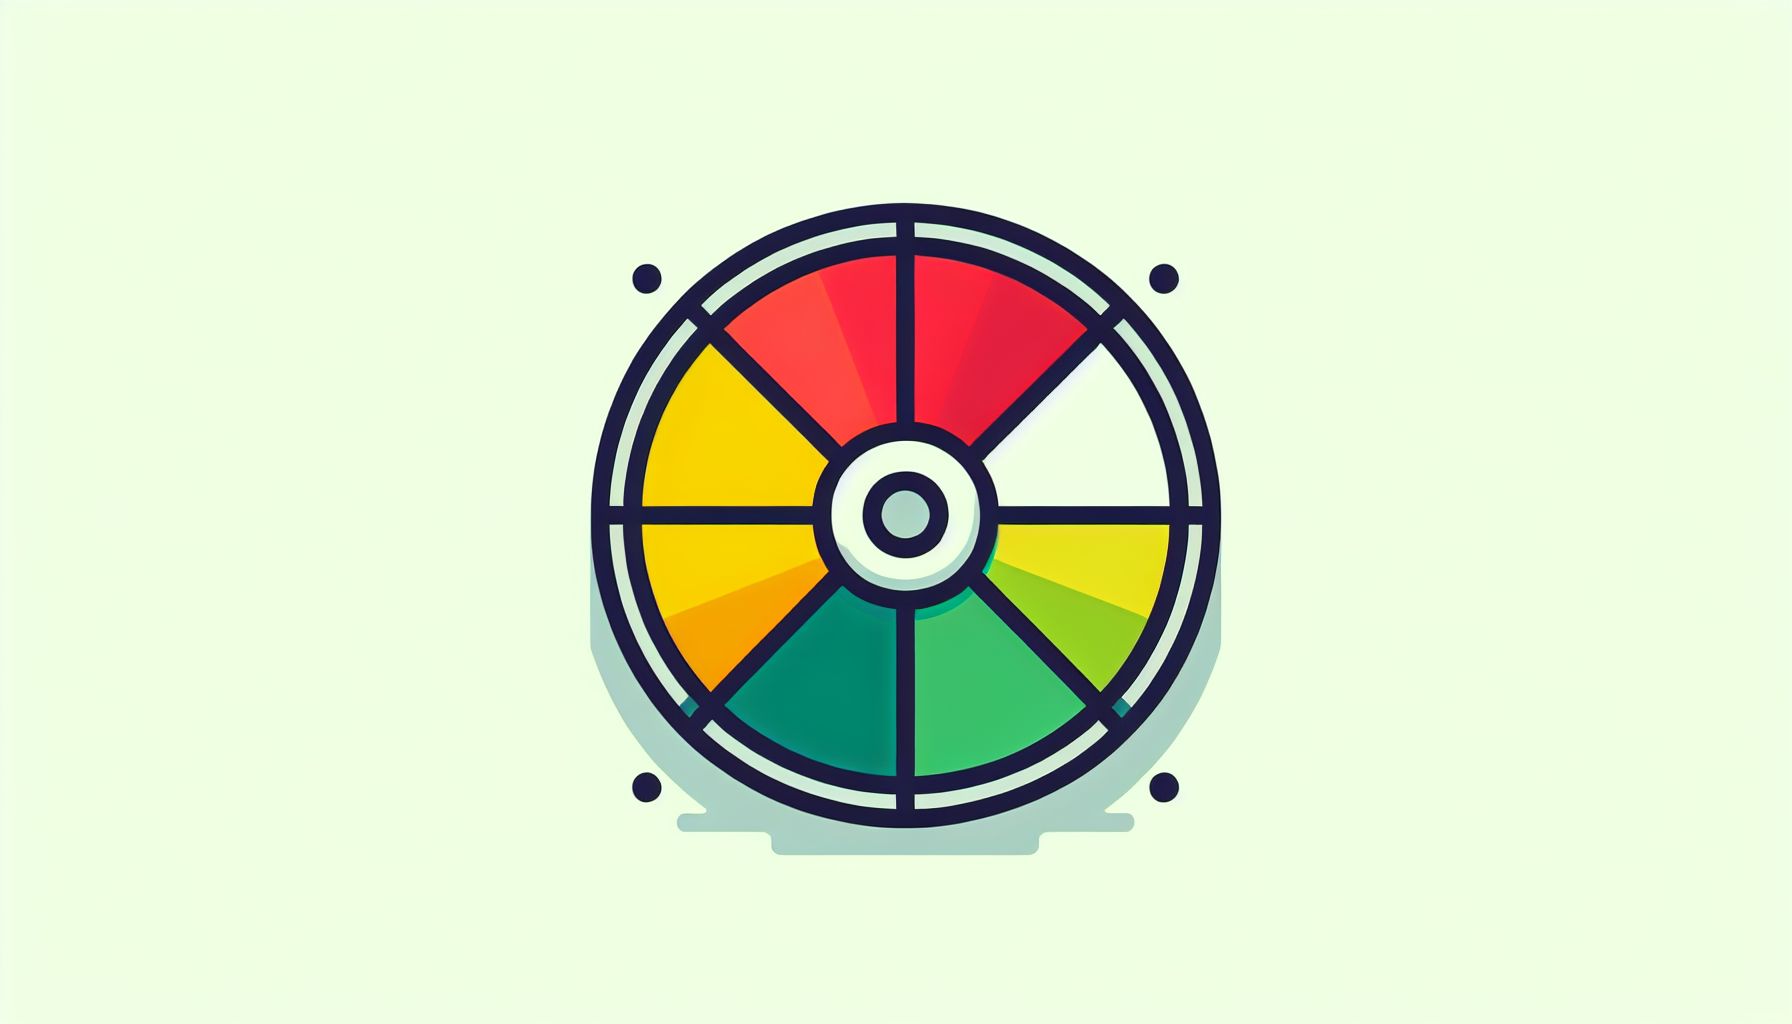 Wheel in flat illustration style and white background, red #f47574, green #88c7a8, yellow #fcc44b, and blue #645bc8 colors.